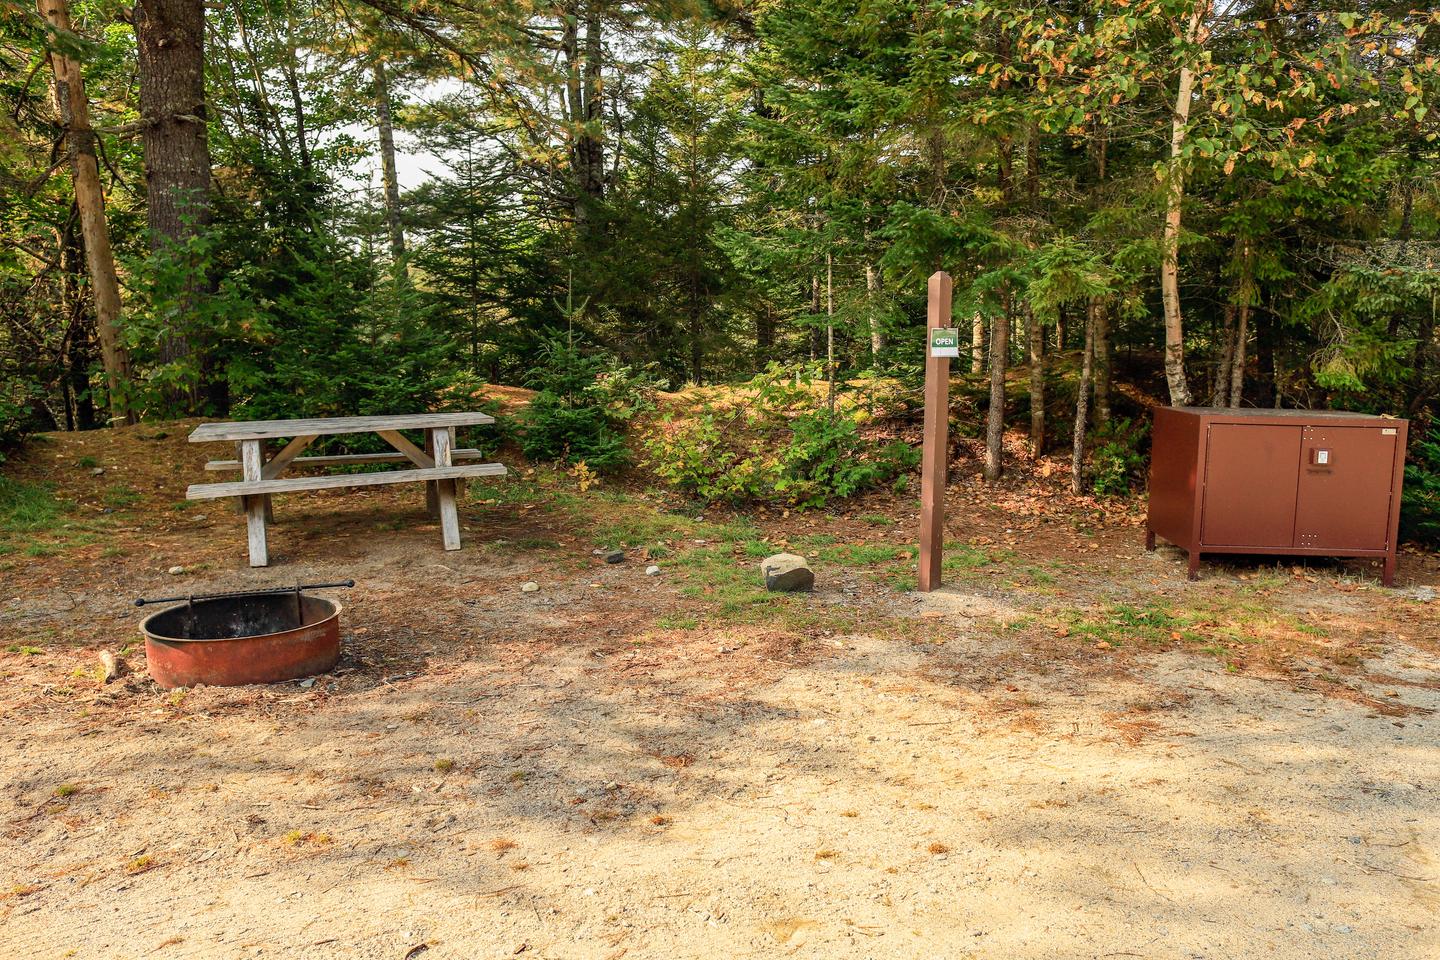 A picture of a campsite with tall trees and vegetation behind it. The ground is composed of gravel and dirt. On the left is a wooden picnic table with a metal fire ring in front of it. A wooden post stands upright to the right of the picnic table with an "open" tag on it. A metal wooden food storage box is on the far right. It is a sunny fall day with warm light. One out of the two campsites located along the forested side of Sandbank Stream Campground.